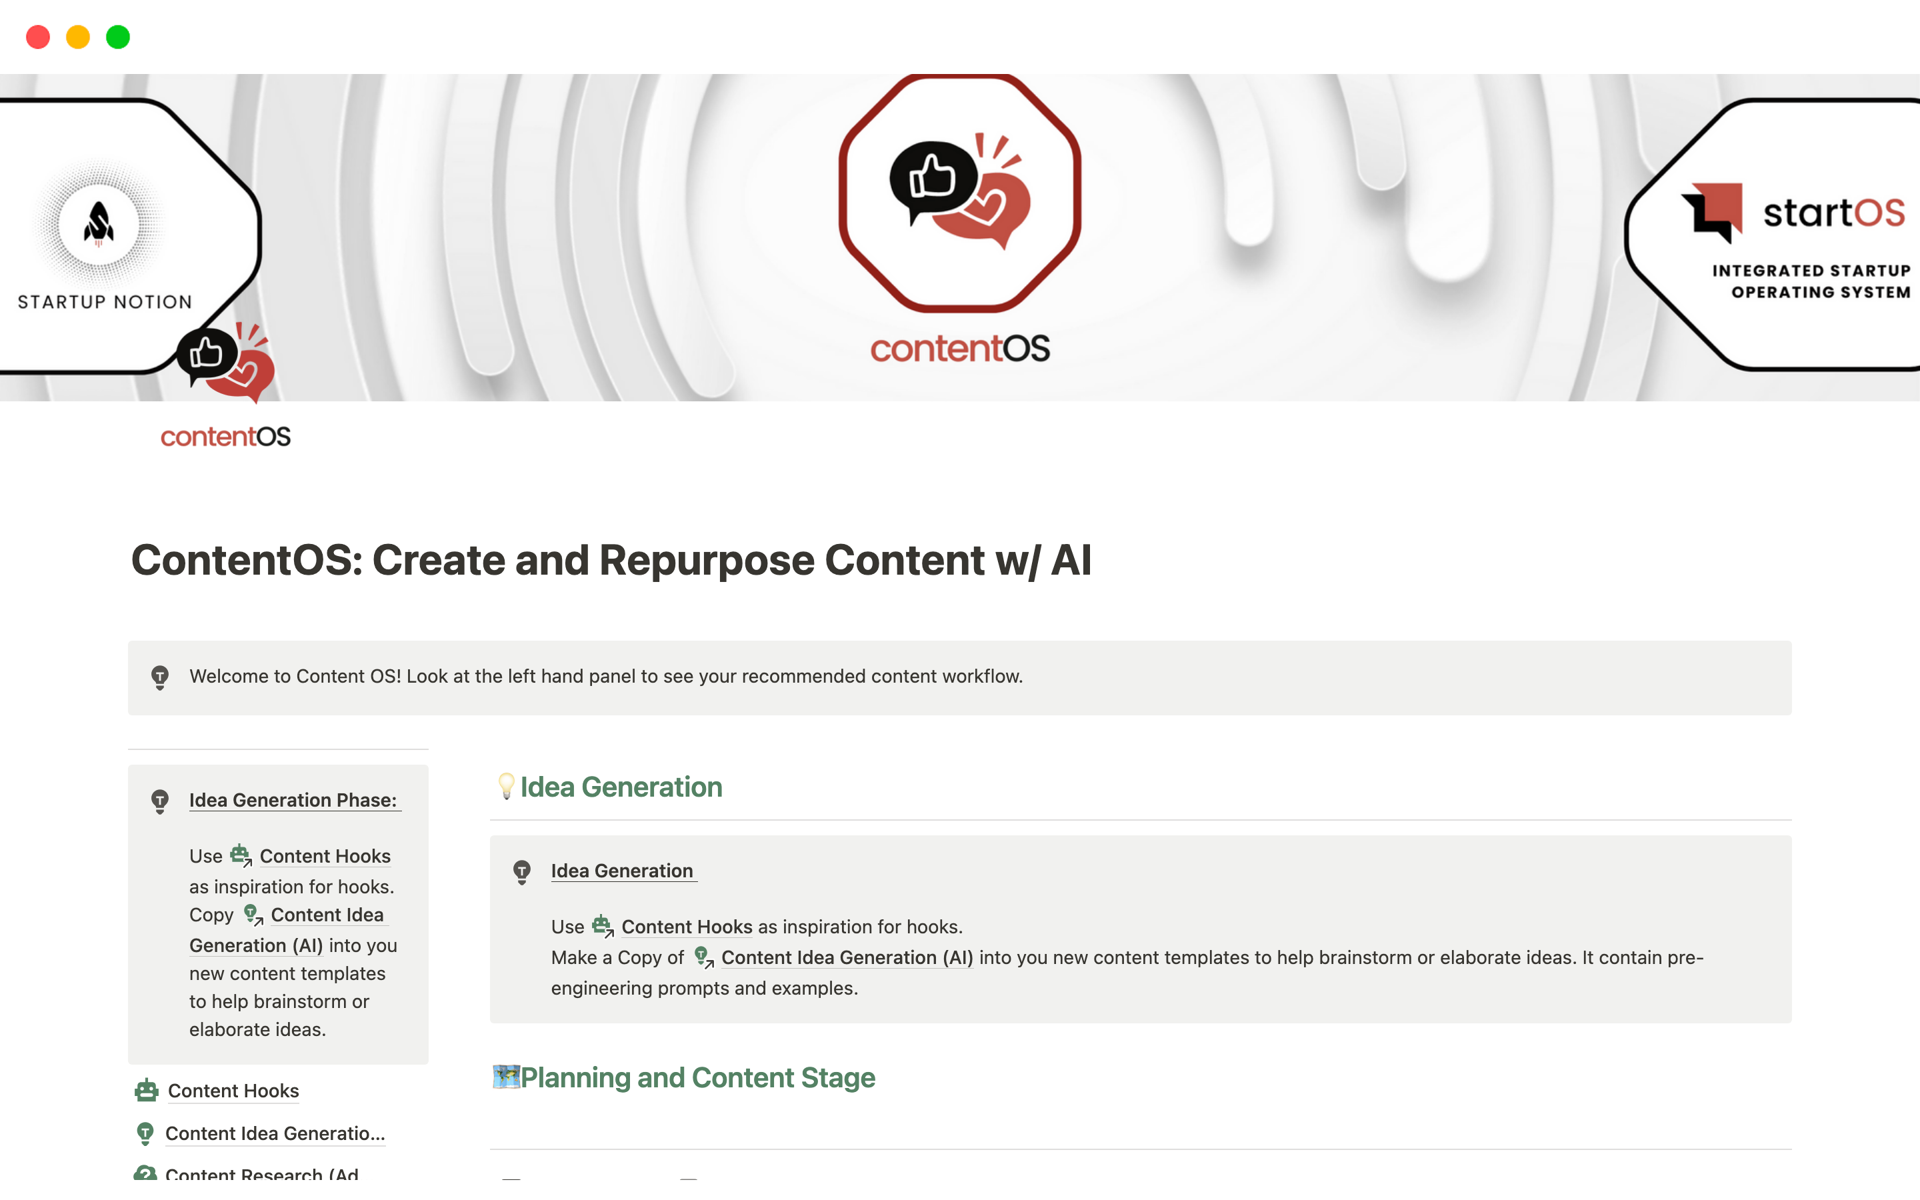 Ideate, create, and repurpose content with an inbuilt AI assistant.